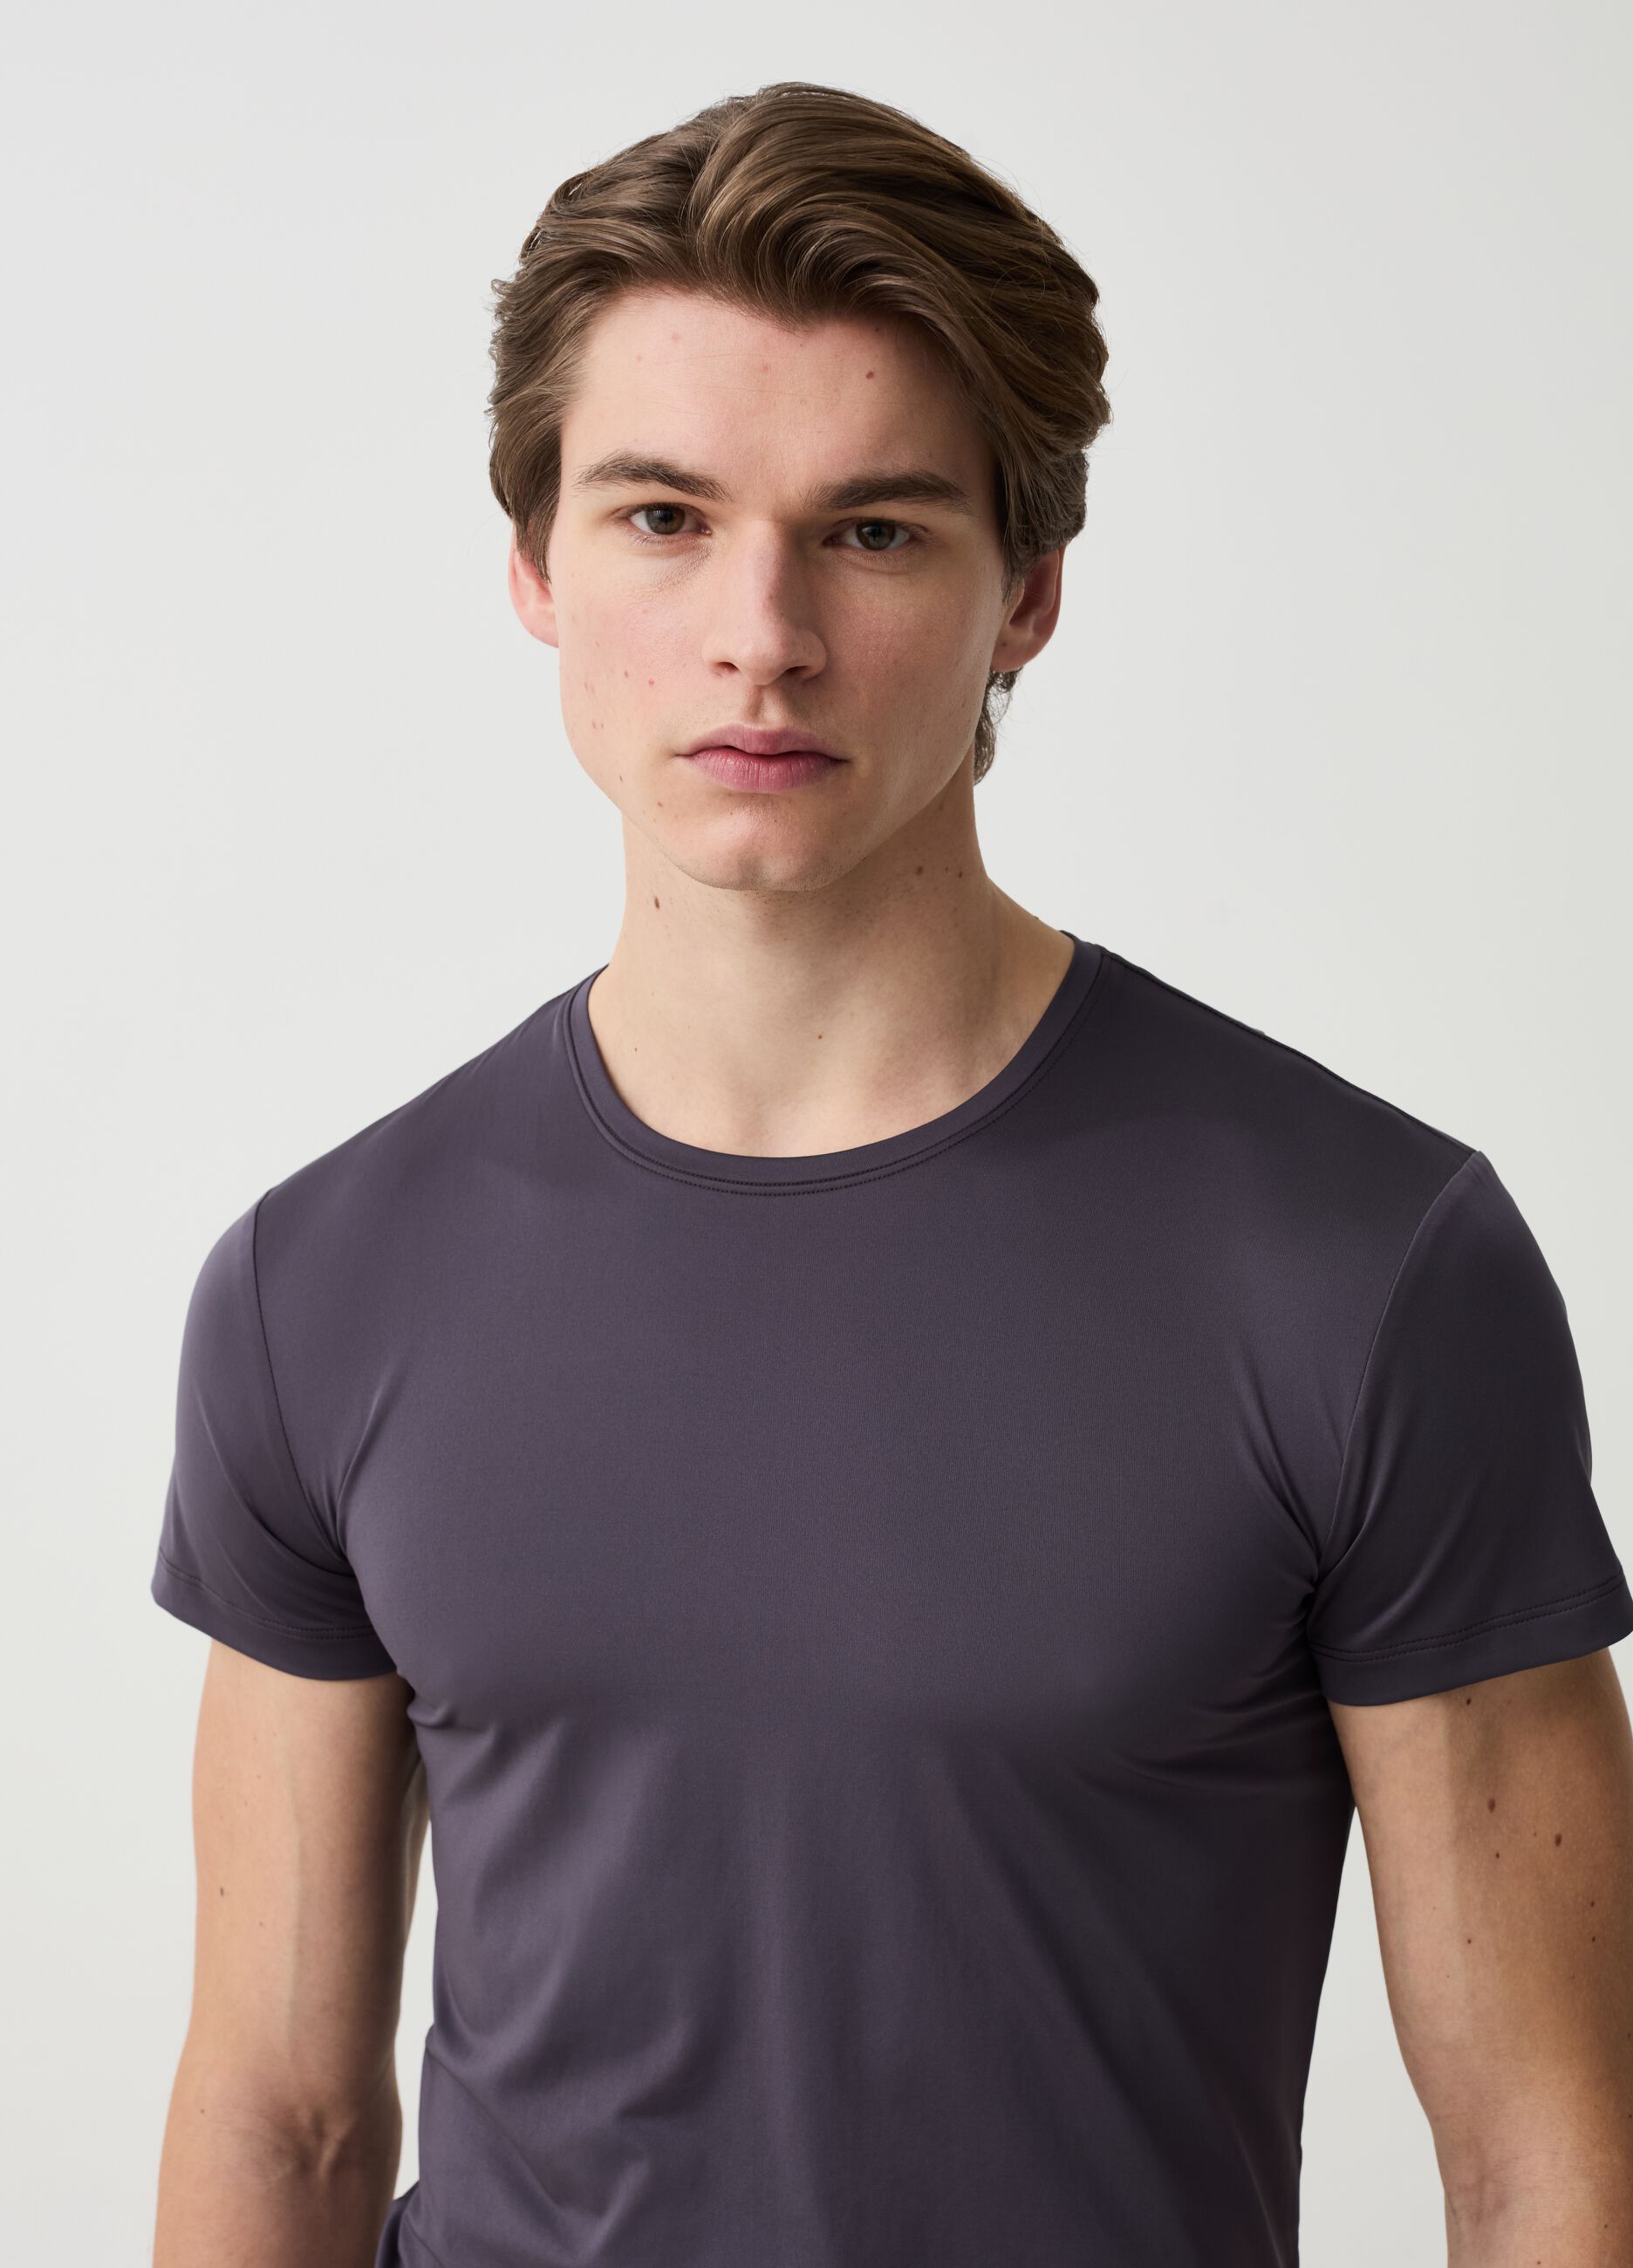 OVS Tech two-pack undershirts with round neck